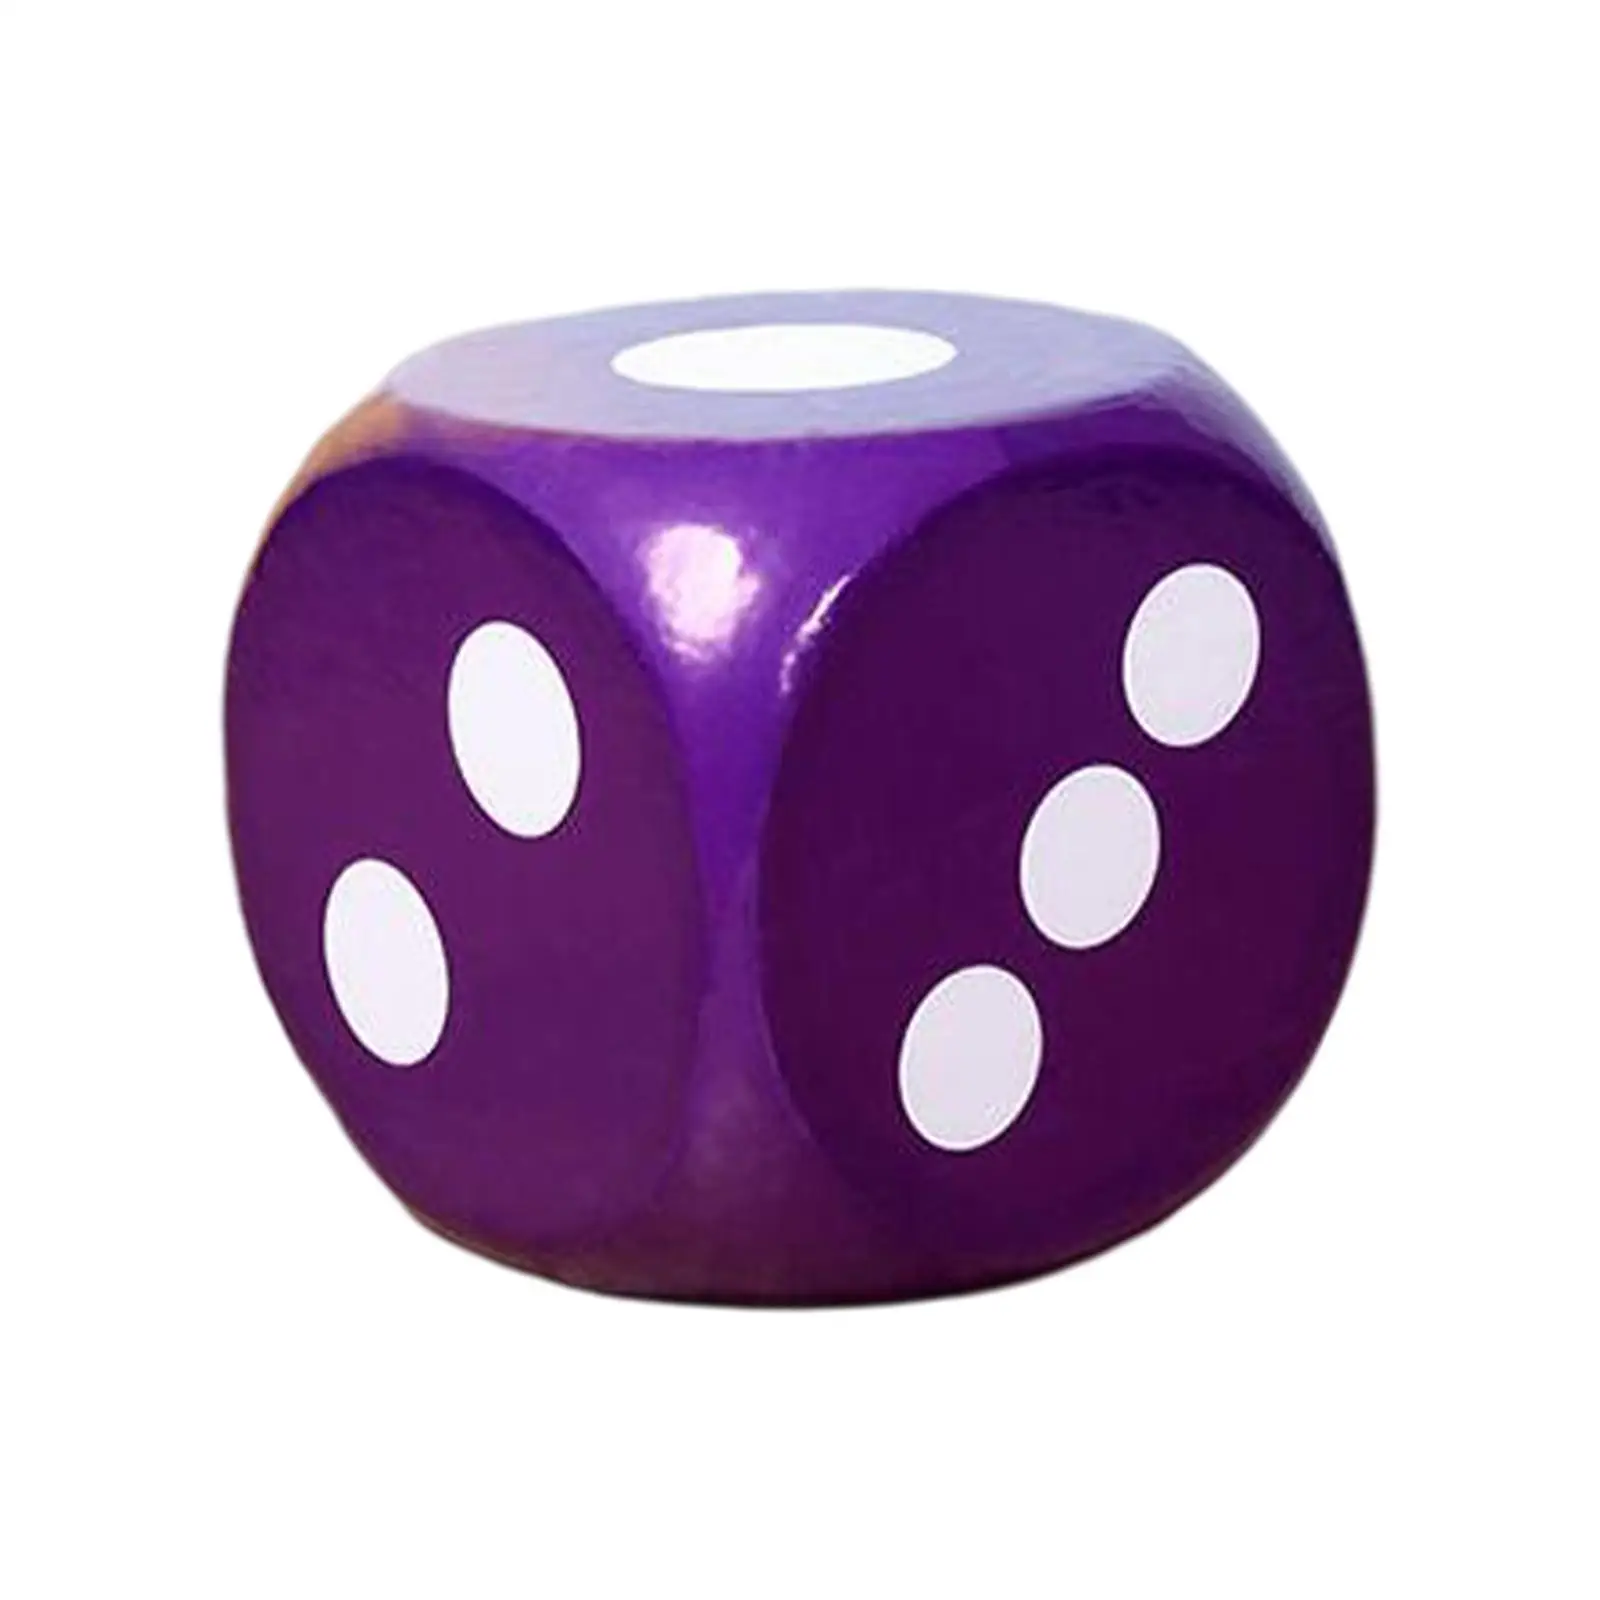 6 Sided Soft Foam Dice Early Math Skills Early Learning Toys Playing Dice for Teacher Kids Children Students Party Favors